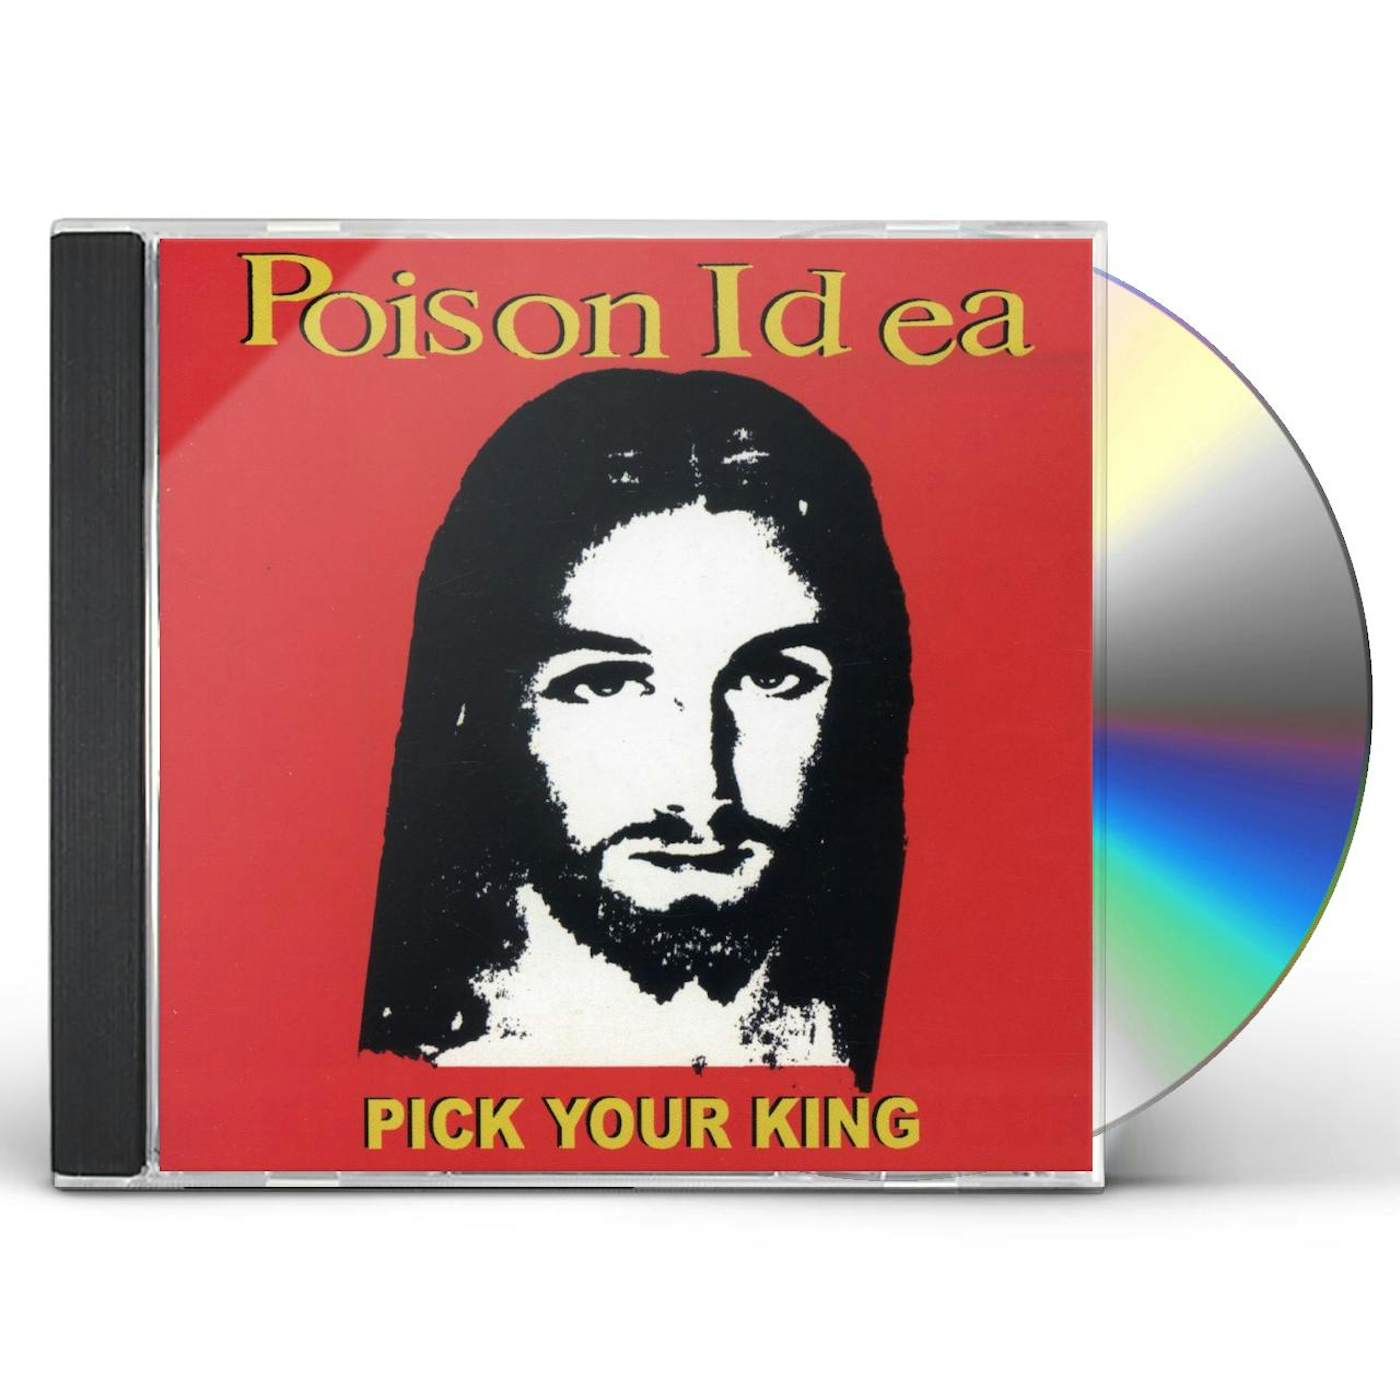 Poison Idea PICK YOUR KING CD